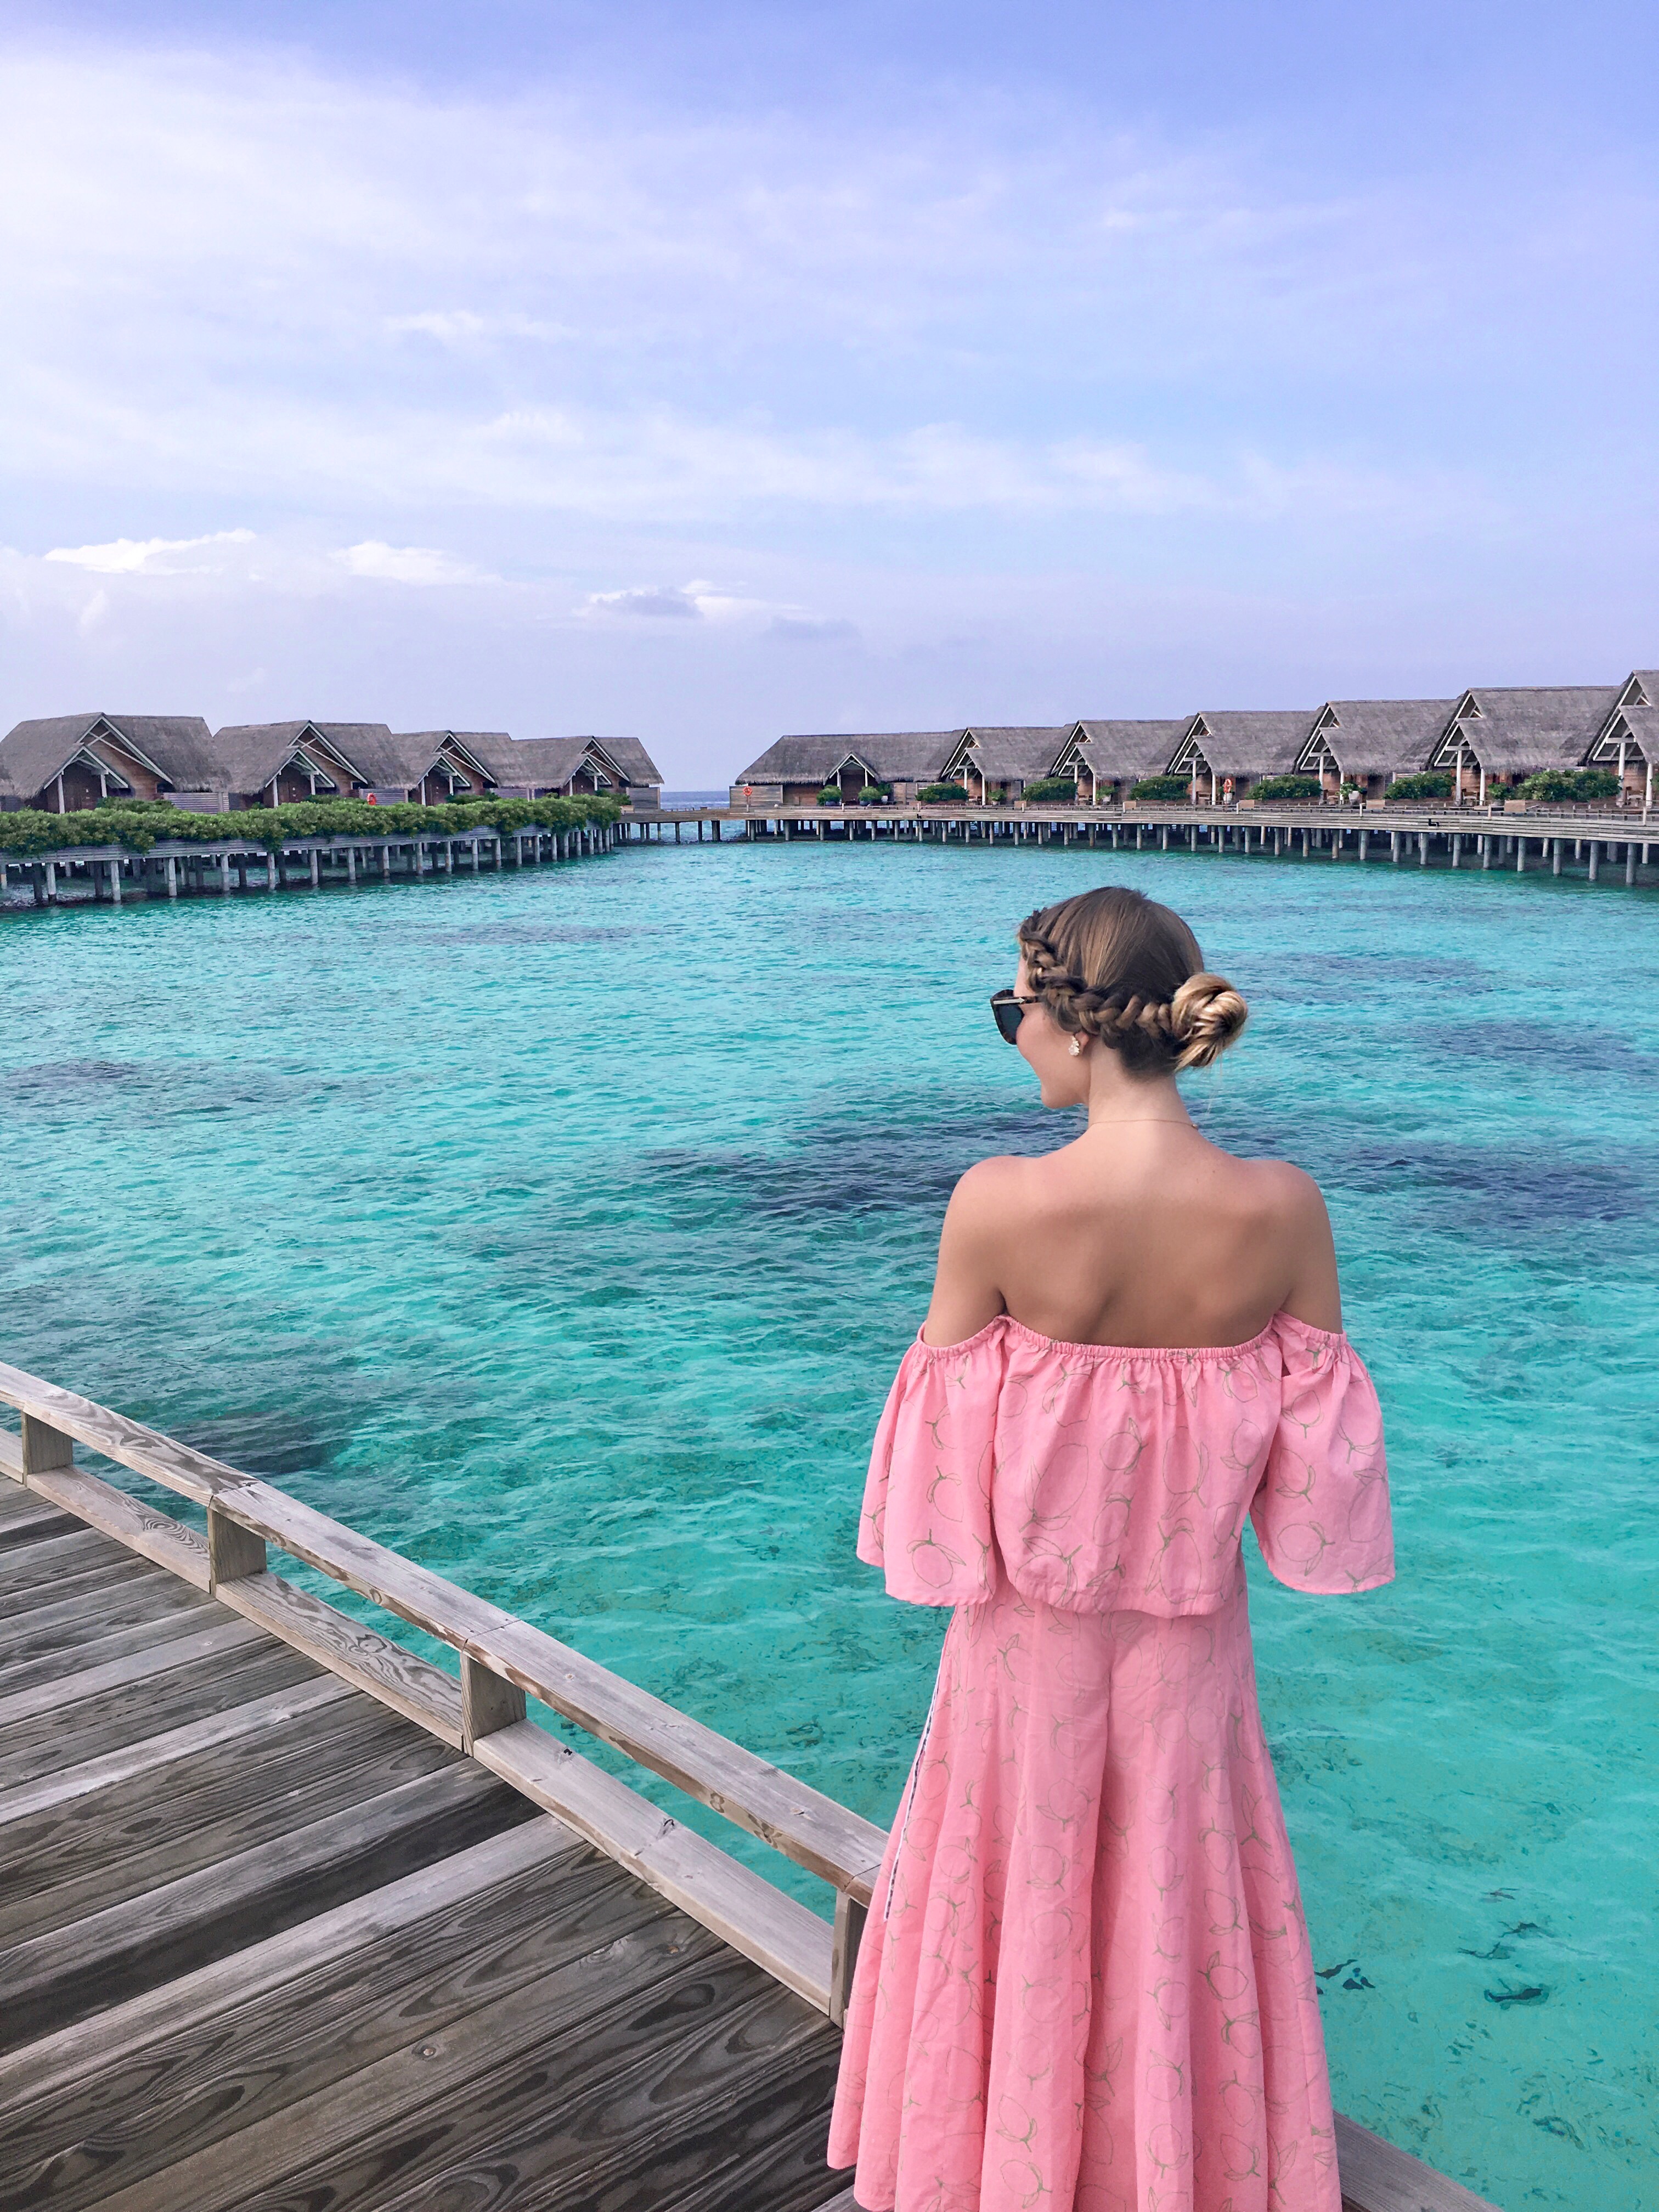 where to stay in the maldives - Maldives Resort Review: Milaidhoo by popular Chicago blogger Visions of Vogue